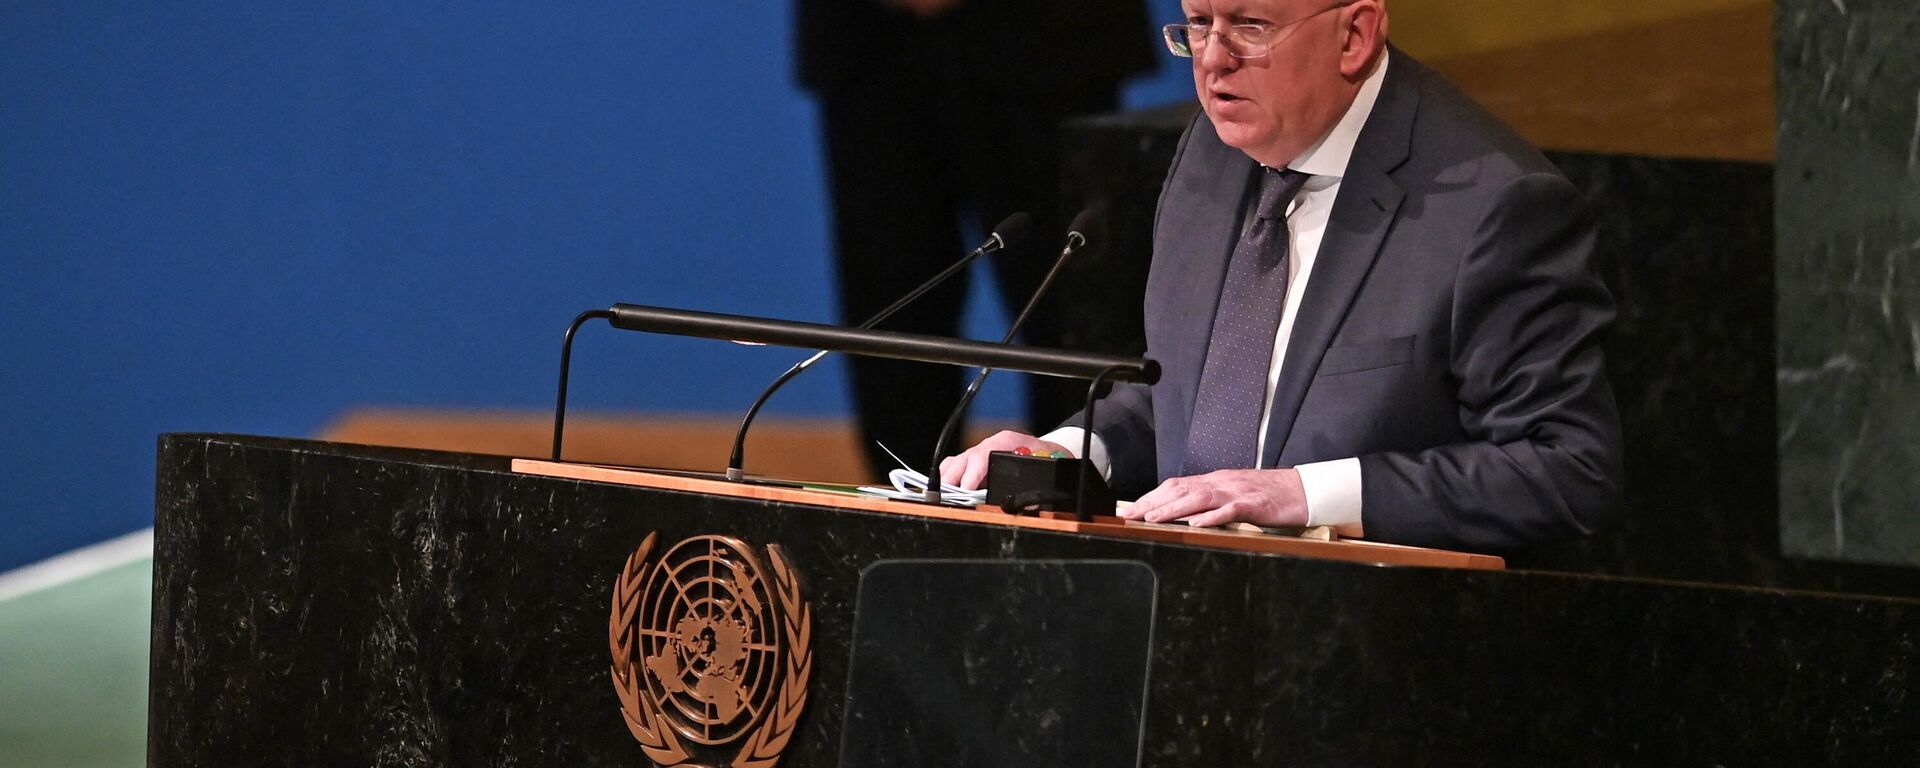 Russia’s Ambassador to the United Nations Vassily Nebenzia speaks during a United Nations (UN) general assembly meeting following the Russian security council veto at UN headquarters in New York City on October 10, 2022 - Sputnik International, 1920, 31.03.2023